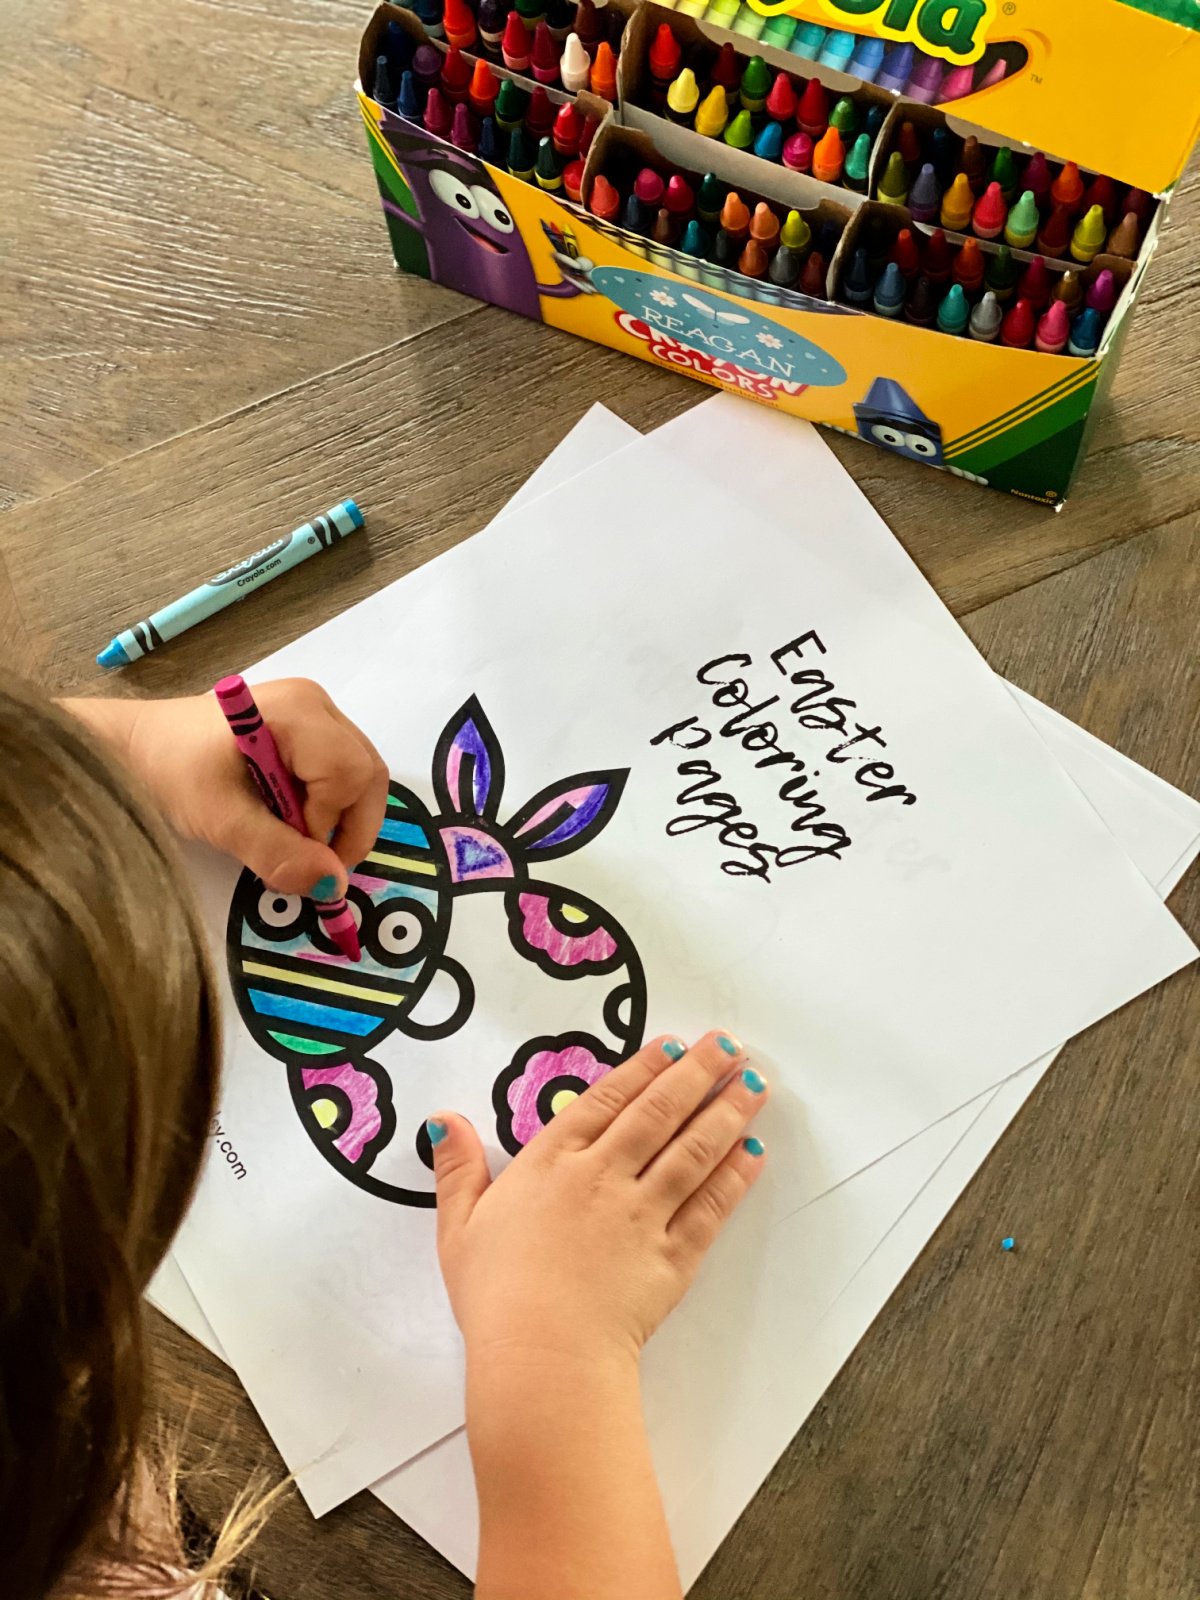 Little girl with blue fingernails coloring an Easter coloring page with crayons.